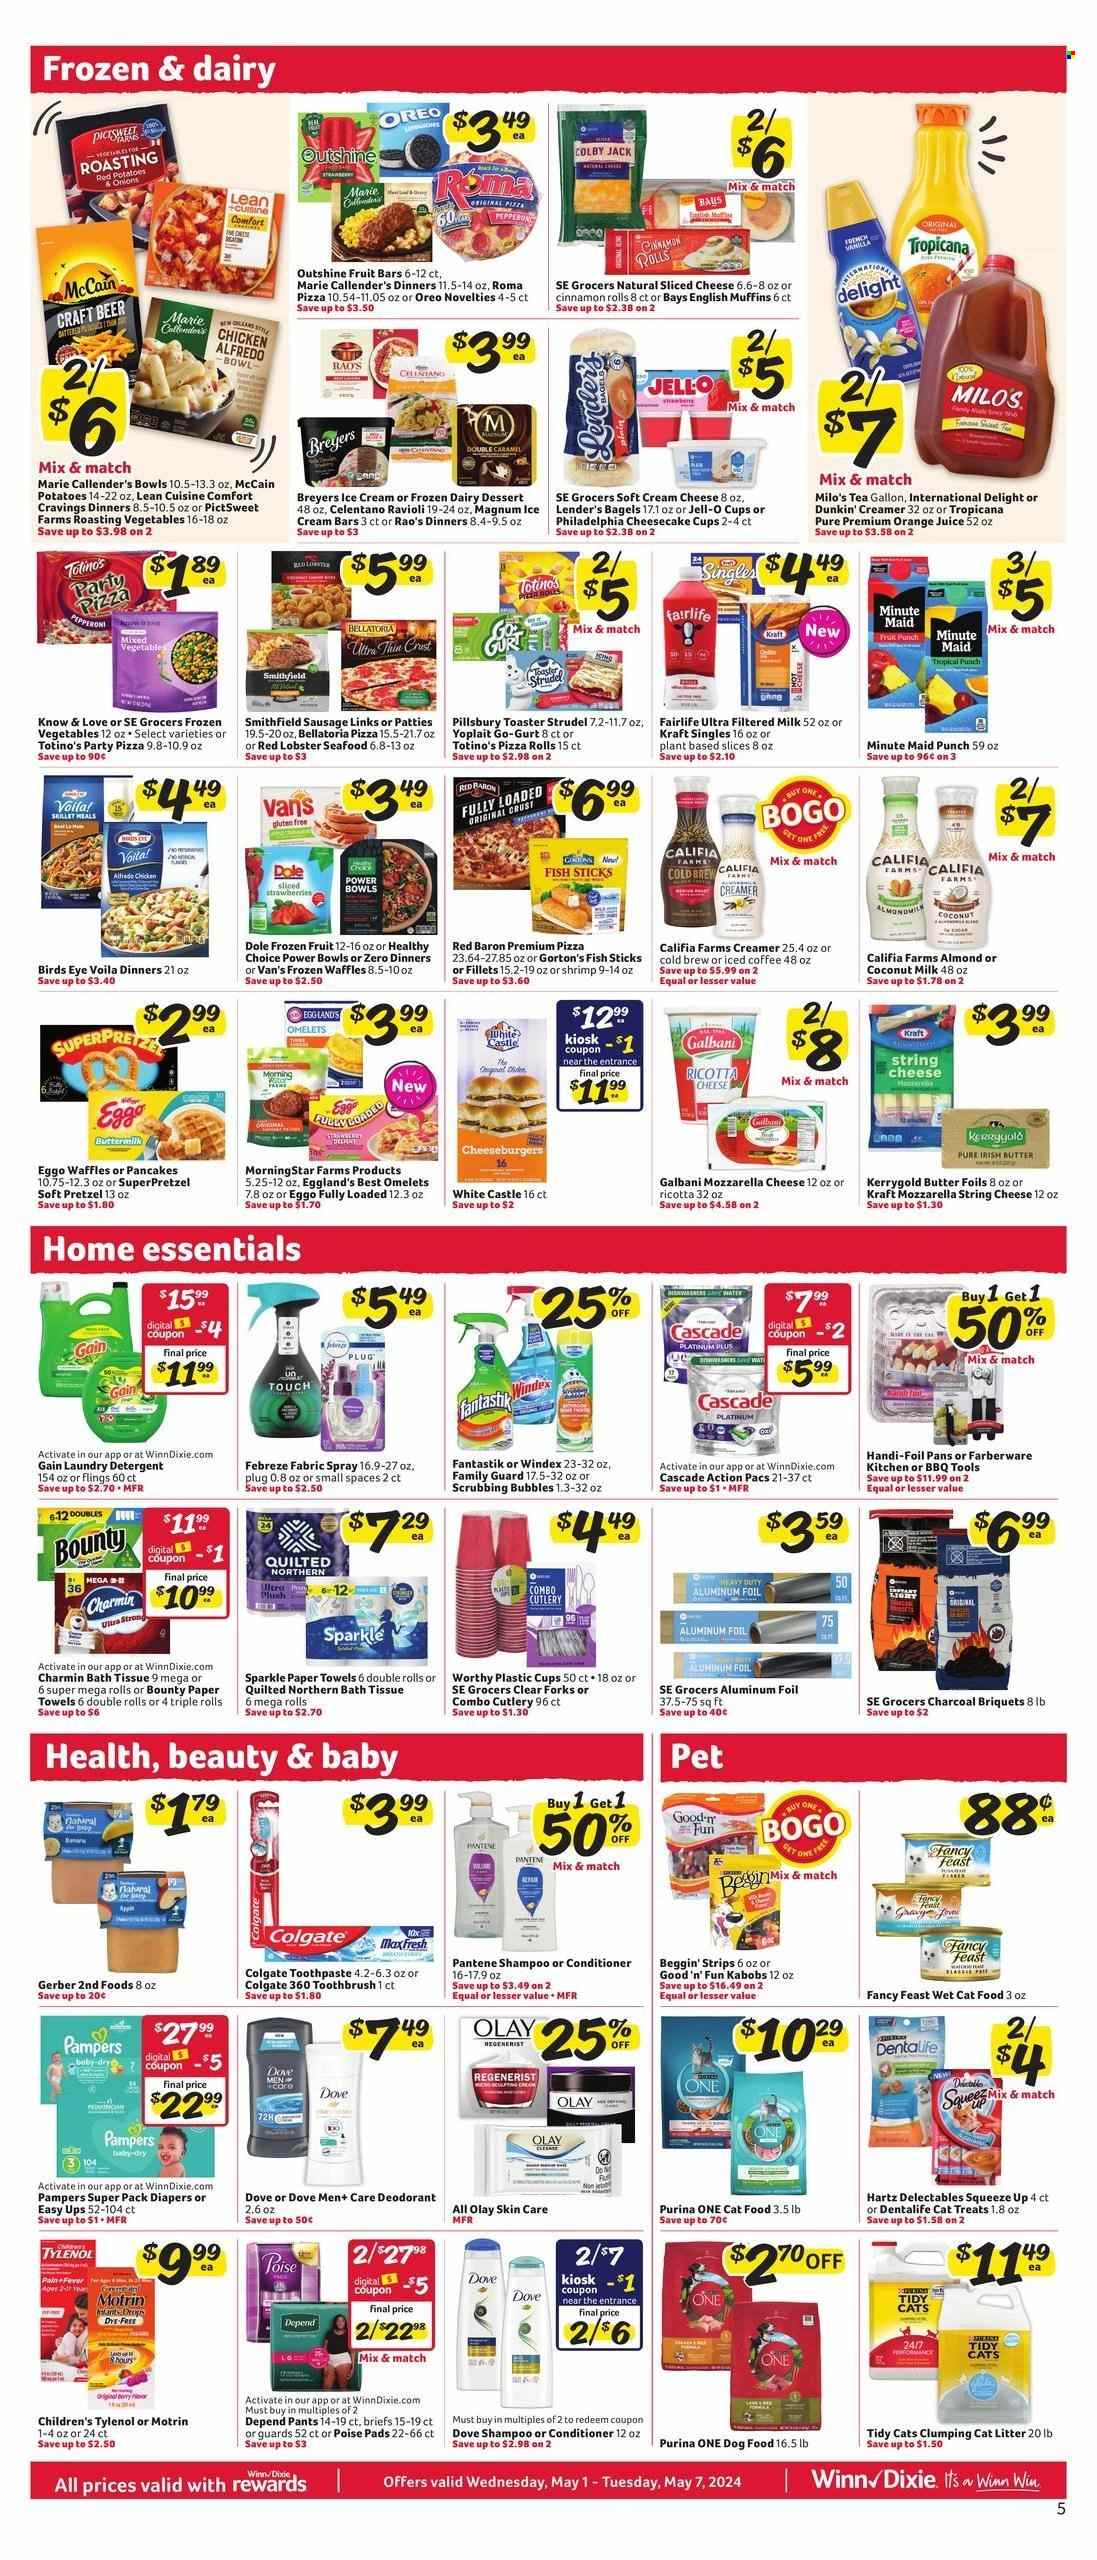 thumbnail - Winn Dixie Flyer - 05/01/2024 - 05/07/2024 - Sales products - bath tissue, Quilted Northern, kitchen towels, paper towels, pizza, Marie Callender's, ready meal, Oreo, ice cream bars, fruit bar, cookies, frozen vegetables, waffles, Dole, Healthy Choice, frozen fruit, bagels, dessert, cream cheese, Philadelphia, cheese, Jell-O, Lean Cuisine, McCain, potato fries, english muffins, sliced cheese, cinnamon roll, creamer, orange juice, juice, ice tea, Milo's, seafood, shrimps, Gorton's, fish sticks, Red Baron, pretzels, pancakes, SuperPretzel, Kellogg's, lobster, Bellatoria, sausage patties, ravioli, Magnum, ice cream, frozen dessert, almond milk, plant-based milk, coconut milk, pizza rolls, strudel, Pillsbury, yoghurt, Yoplait, pan, kitchen tools, Bounty, Charmin, aluminium foil, shampoo, conditioner, Pantene, Olay, skin care product, MorningStar Farms, plant based ready meal, animal food, animal treats, cat food, dental treats, Dentalife, wet cat food, pads, sanitary pads, incontinence underwear, Poise, incontinence care, cat litter, Purina, Cascade, dishwasher tablets, cup, plastic cup, charcoal, Colgate, toothbrush, toothpaste, Windex, Scrubbing Bubbles, cleaner, kabobs, Good 'n' Fun, Beggin', Fancy Feast, Pampers, nappies, Gerber, baby snack, Tylenol, Motrin, Dove, deodorant, dog food, Kraft®, mozzarella, string cheese, butter, detergent, Gain, laundry detergent, Febreze, fabric refresher, sandwich slices, Kraft Singles, milk, Bird's Eye, Galbani. Page 9.